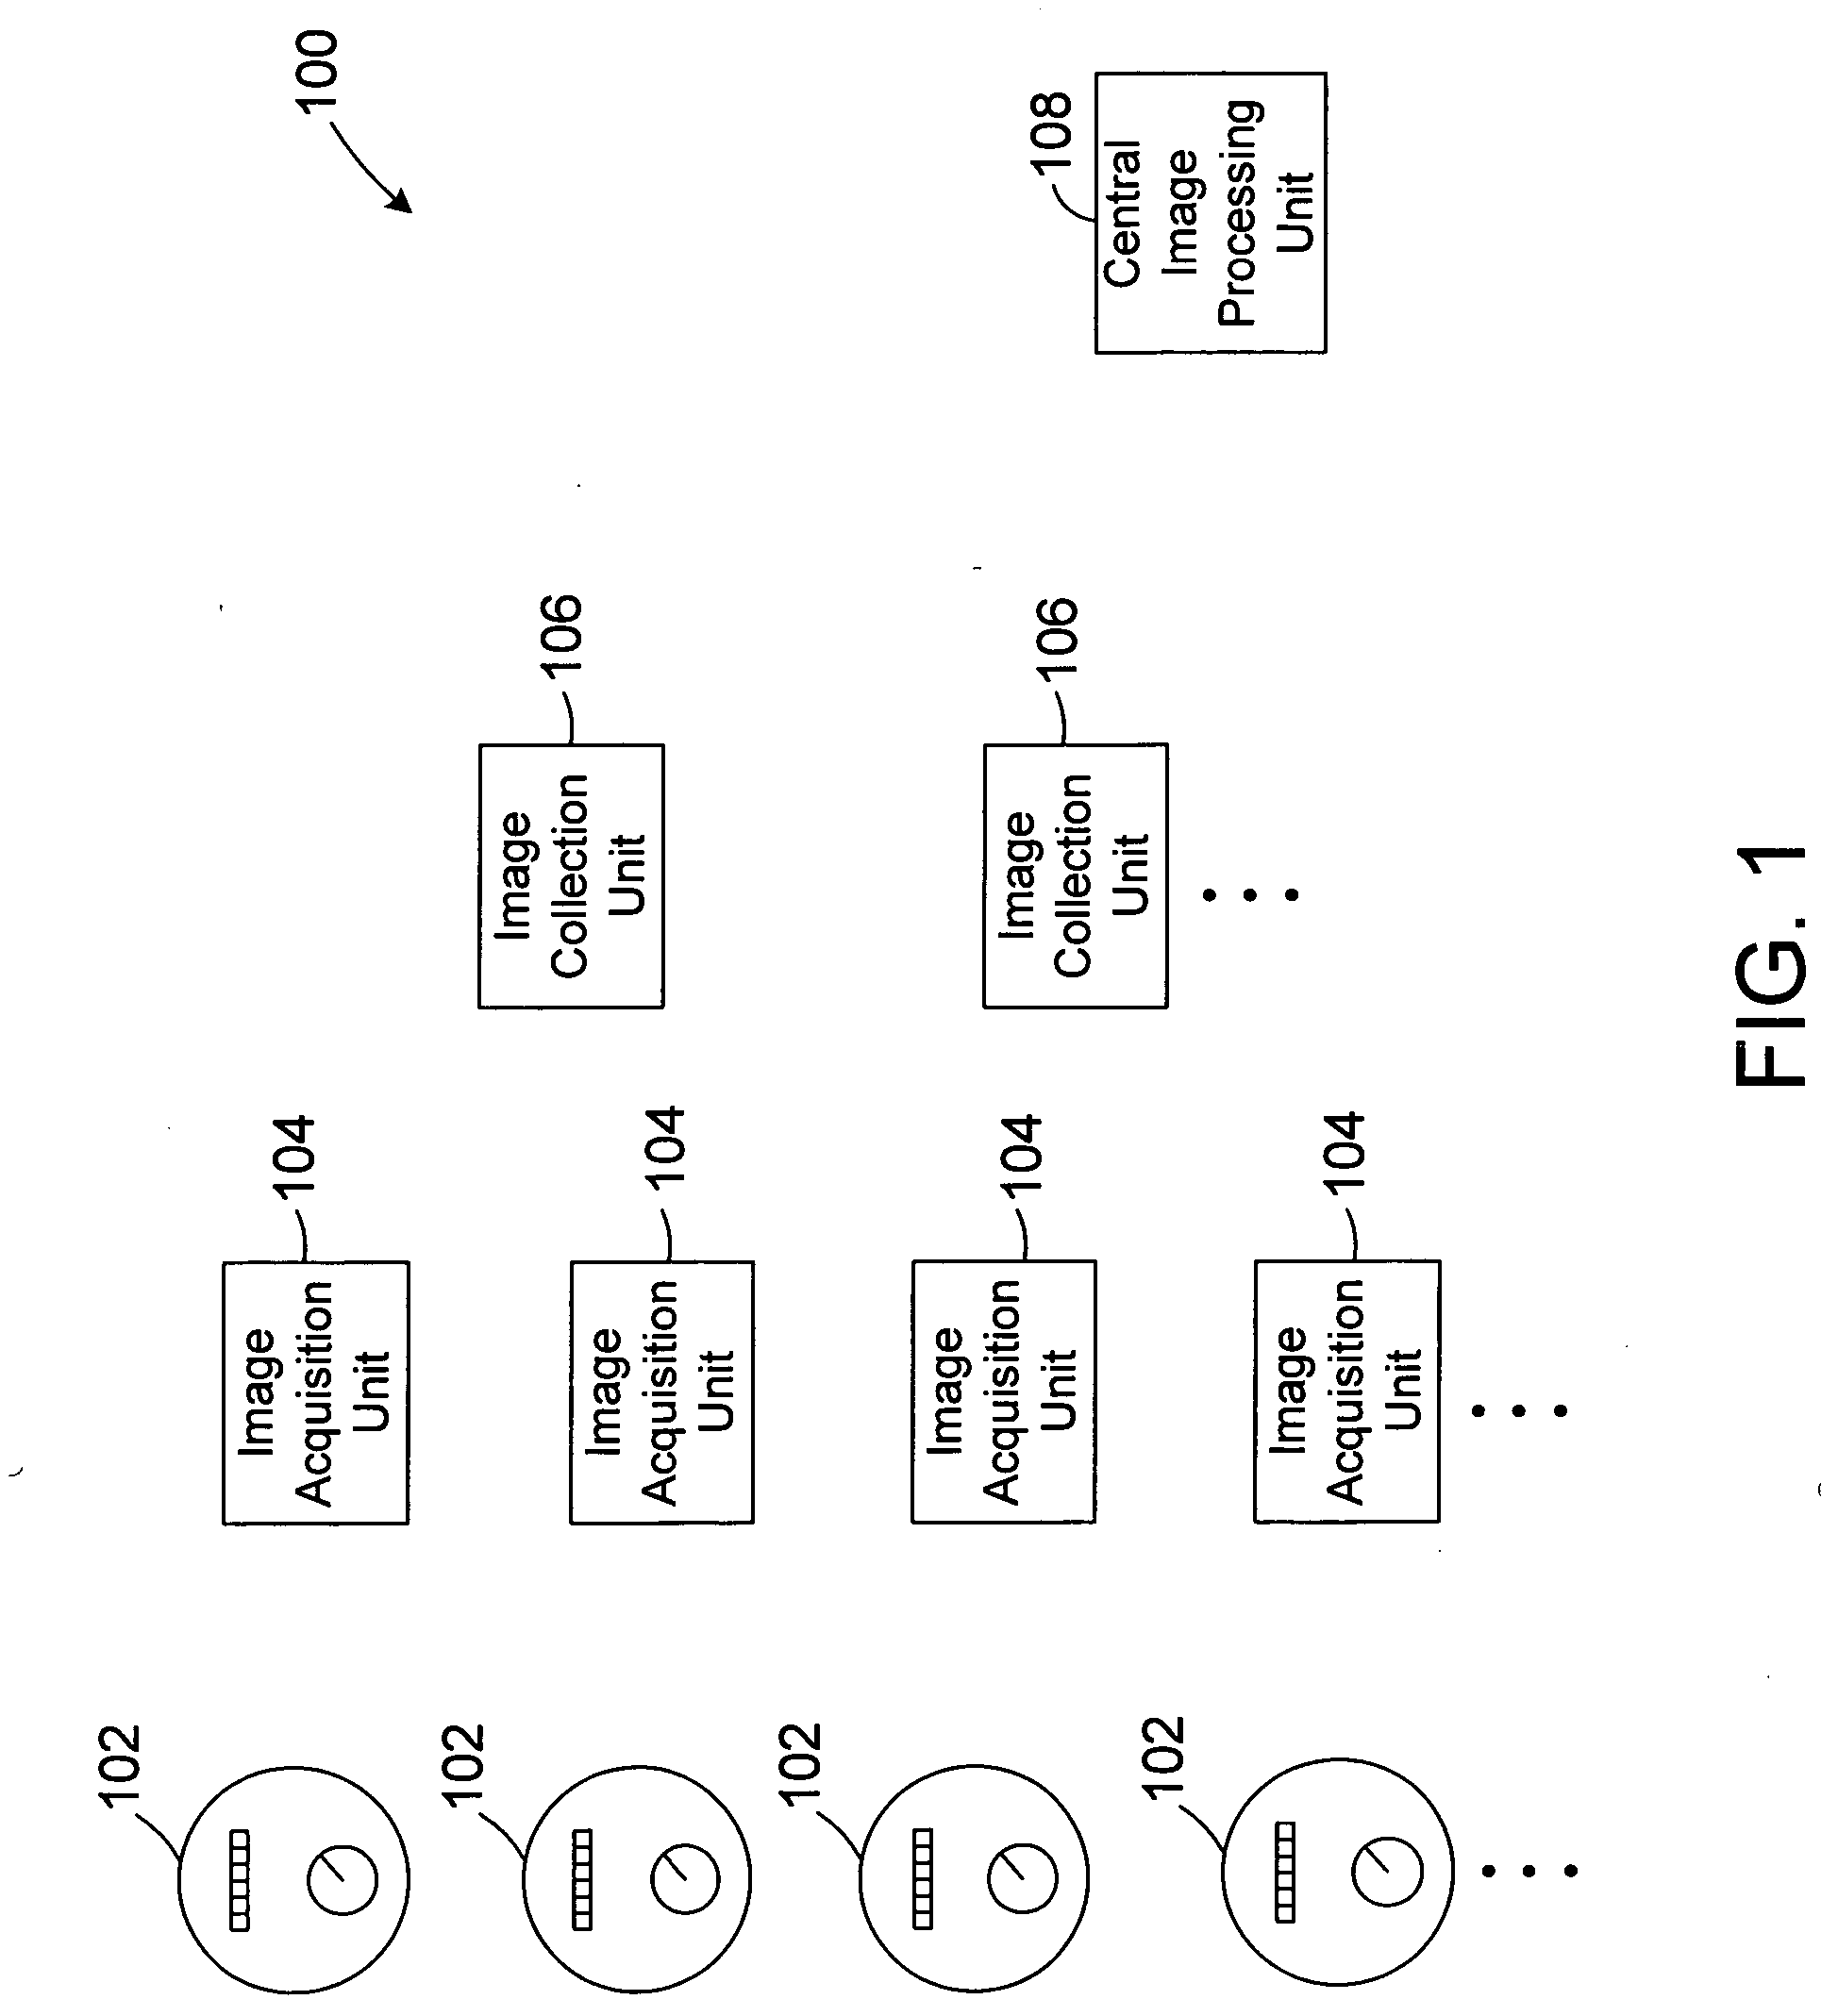 System and method for collecting images of a monitored device